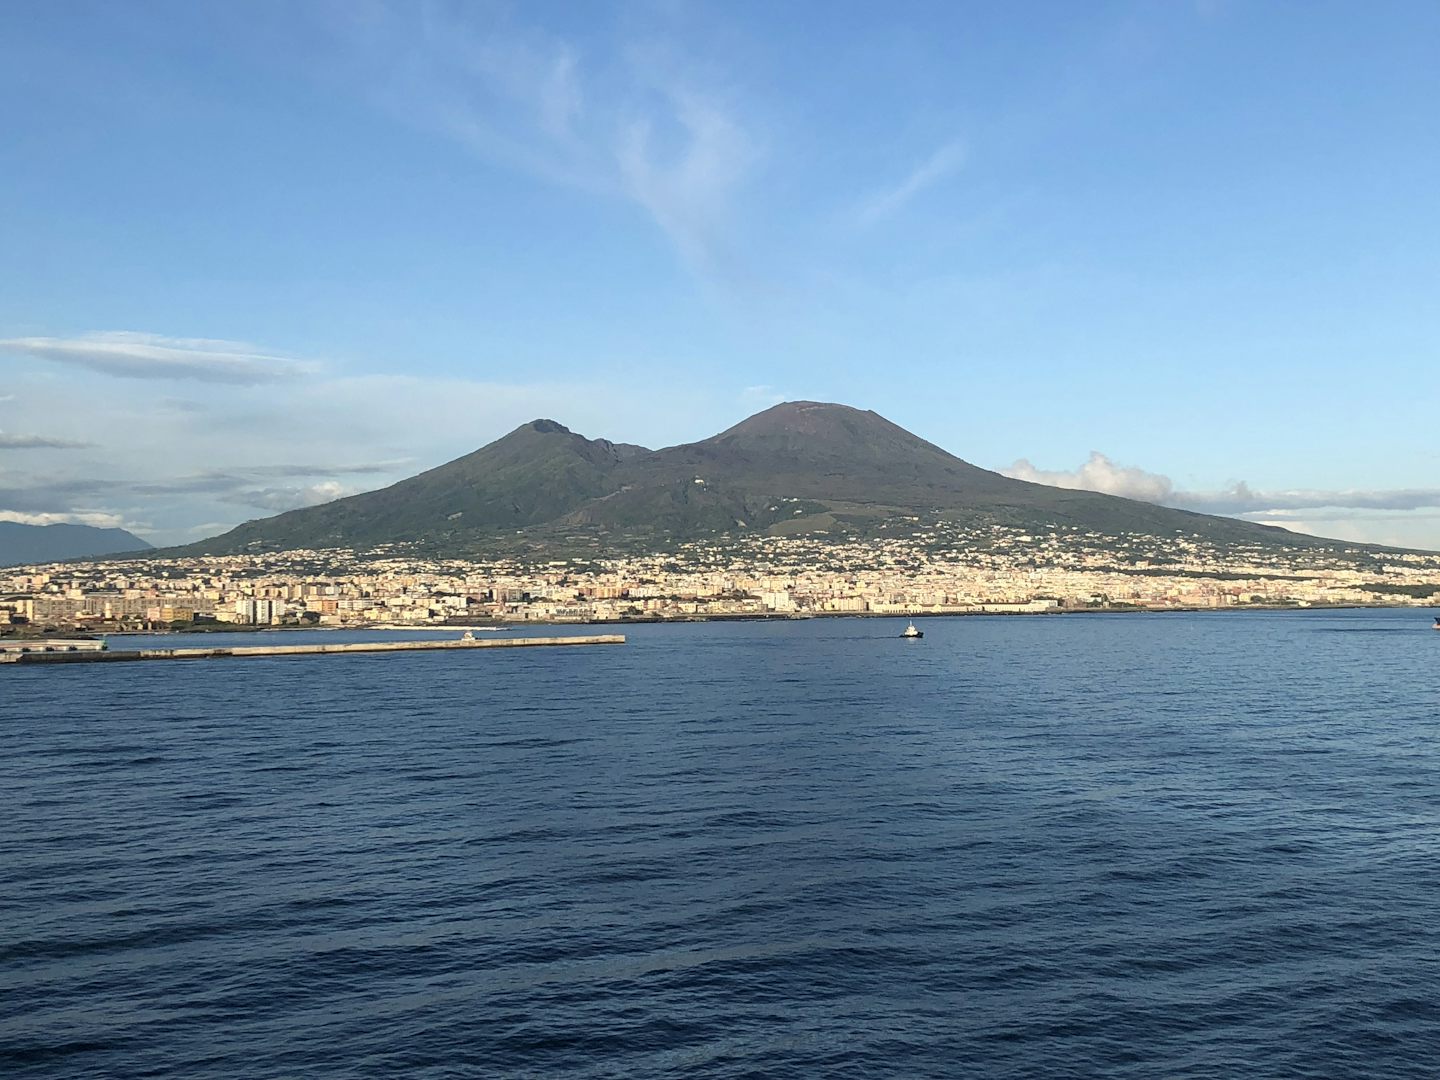 Naples a view from the ship